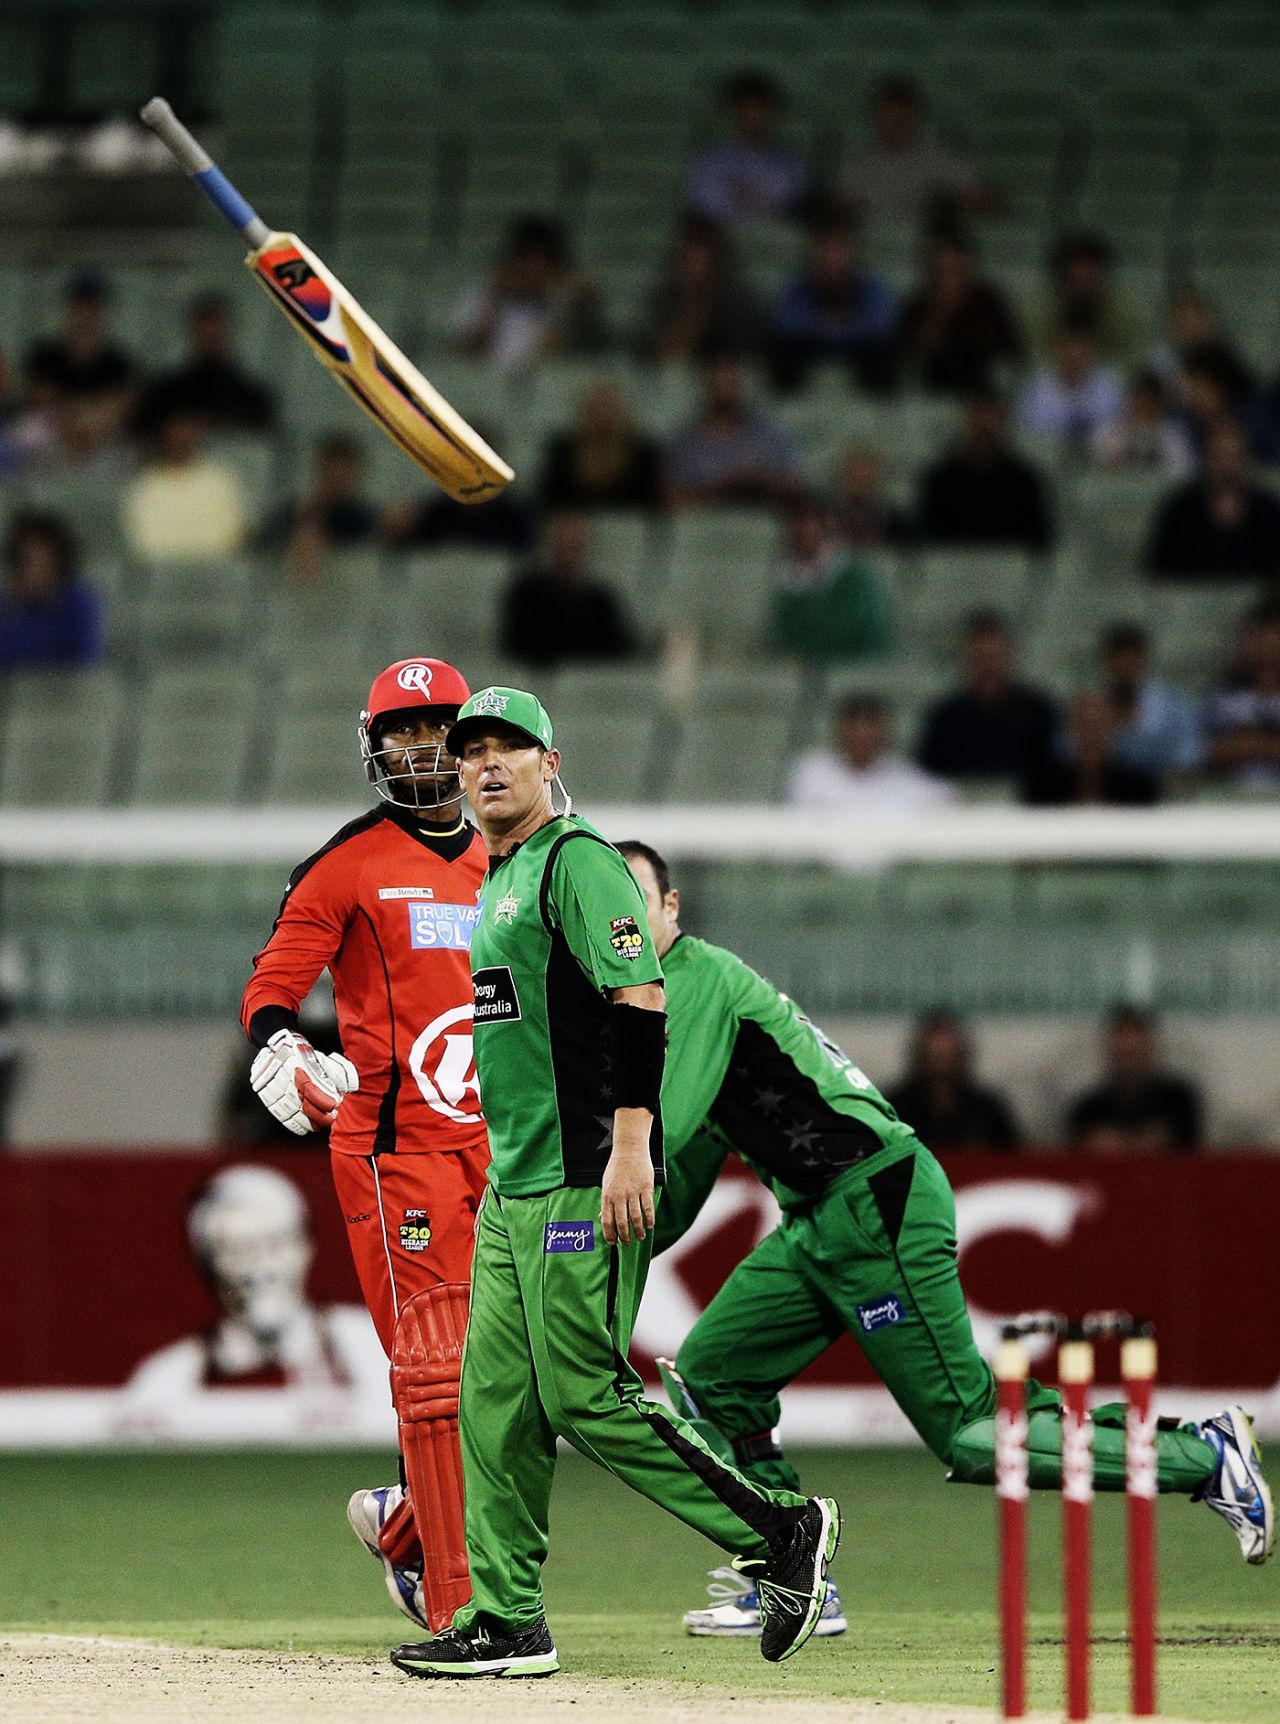 Marlon Samuels throws his bat in the air after getting hit by a throw from Shane Warne, Melbourne Stars v Melbourne Renegades, Big Bash League, MCG, January 6, 2013